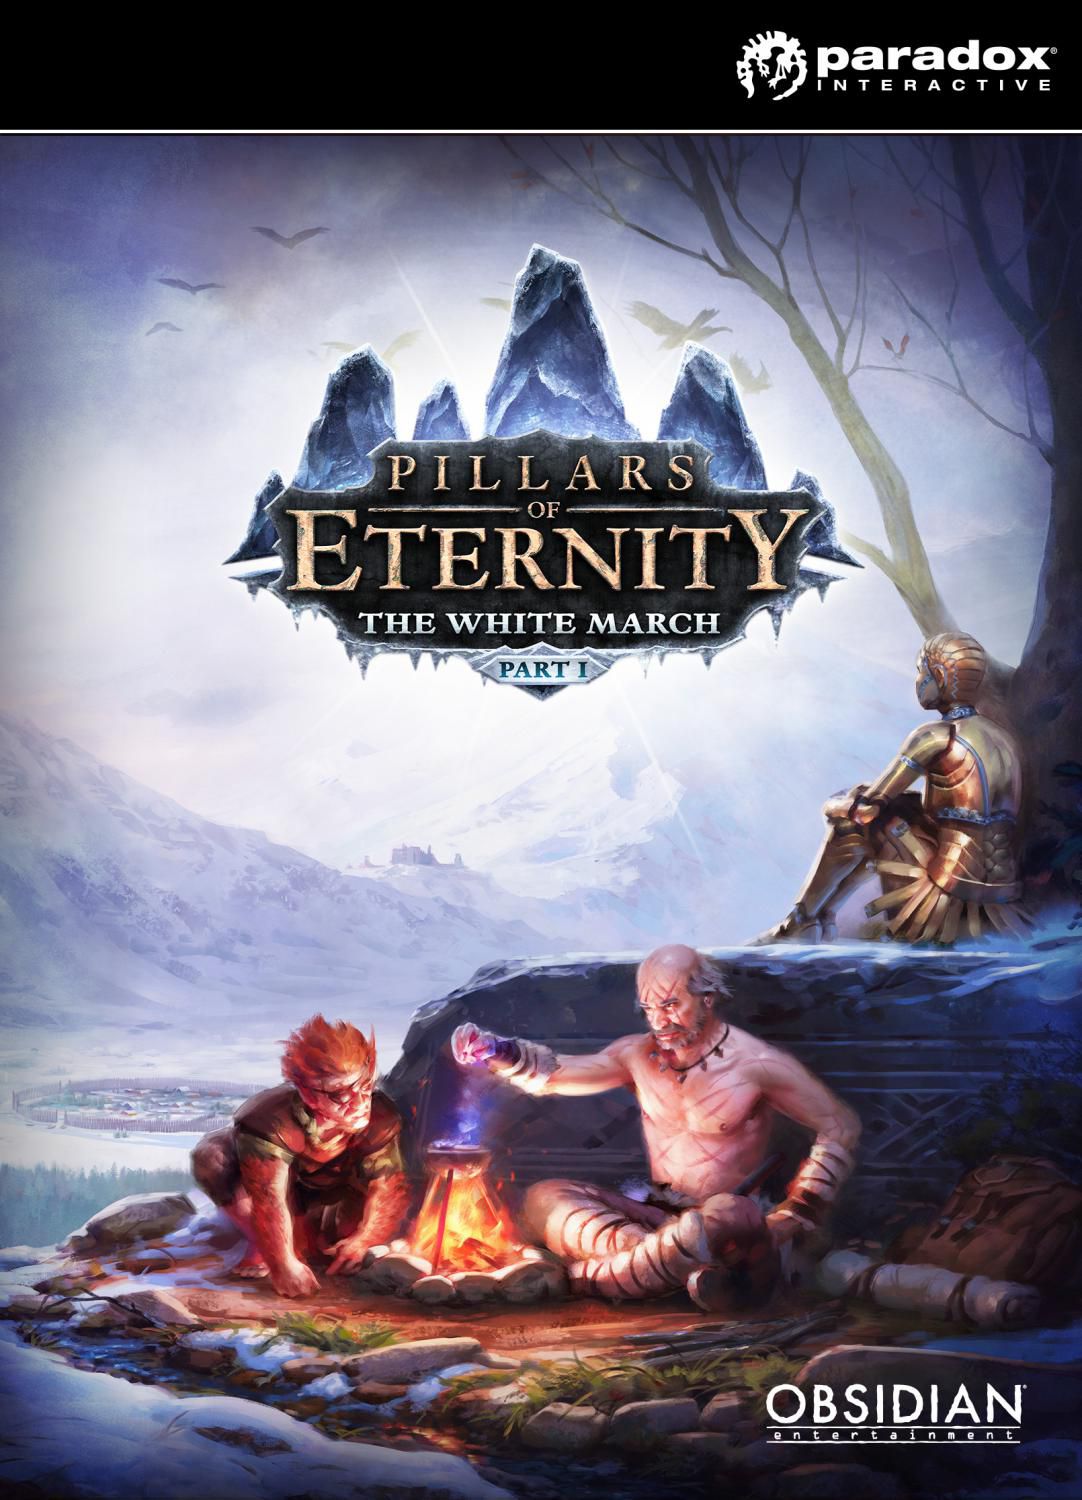 Pillars of Eternity : The White March - Part I  - Jeu vidéo streaming VF gratuit complet